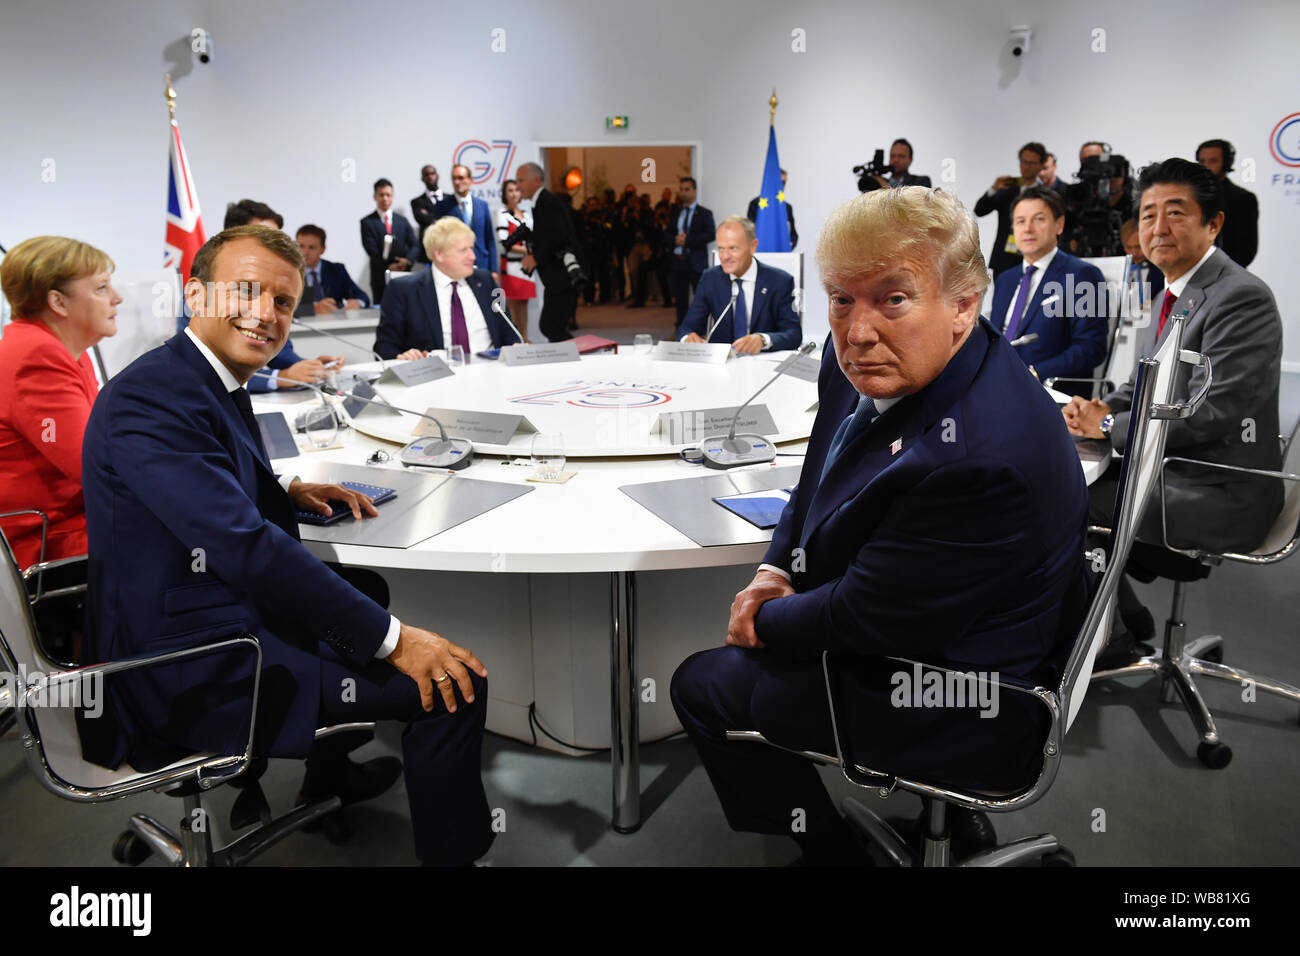 France's President Emmanuel Macron and US President Donald Trump pose for the media as they meet for the first working session of the G7 Summit in Biarritz, France. Stock Photo